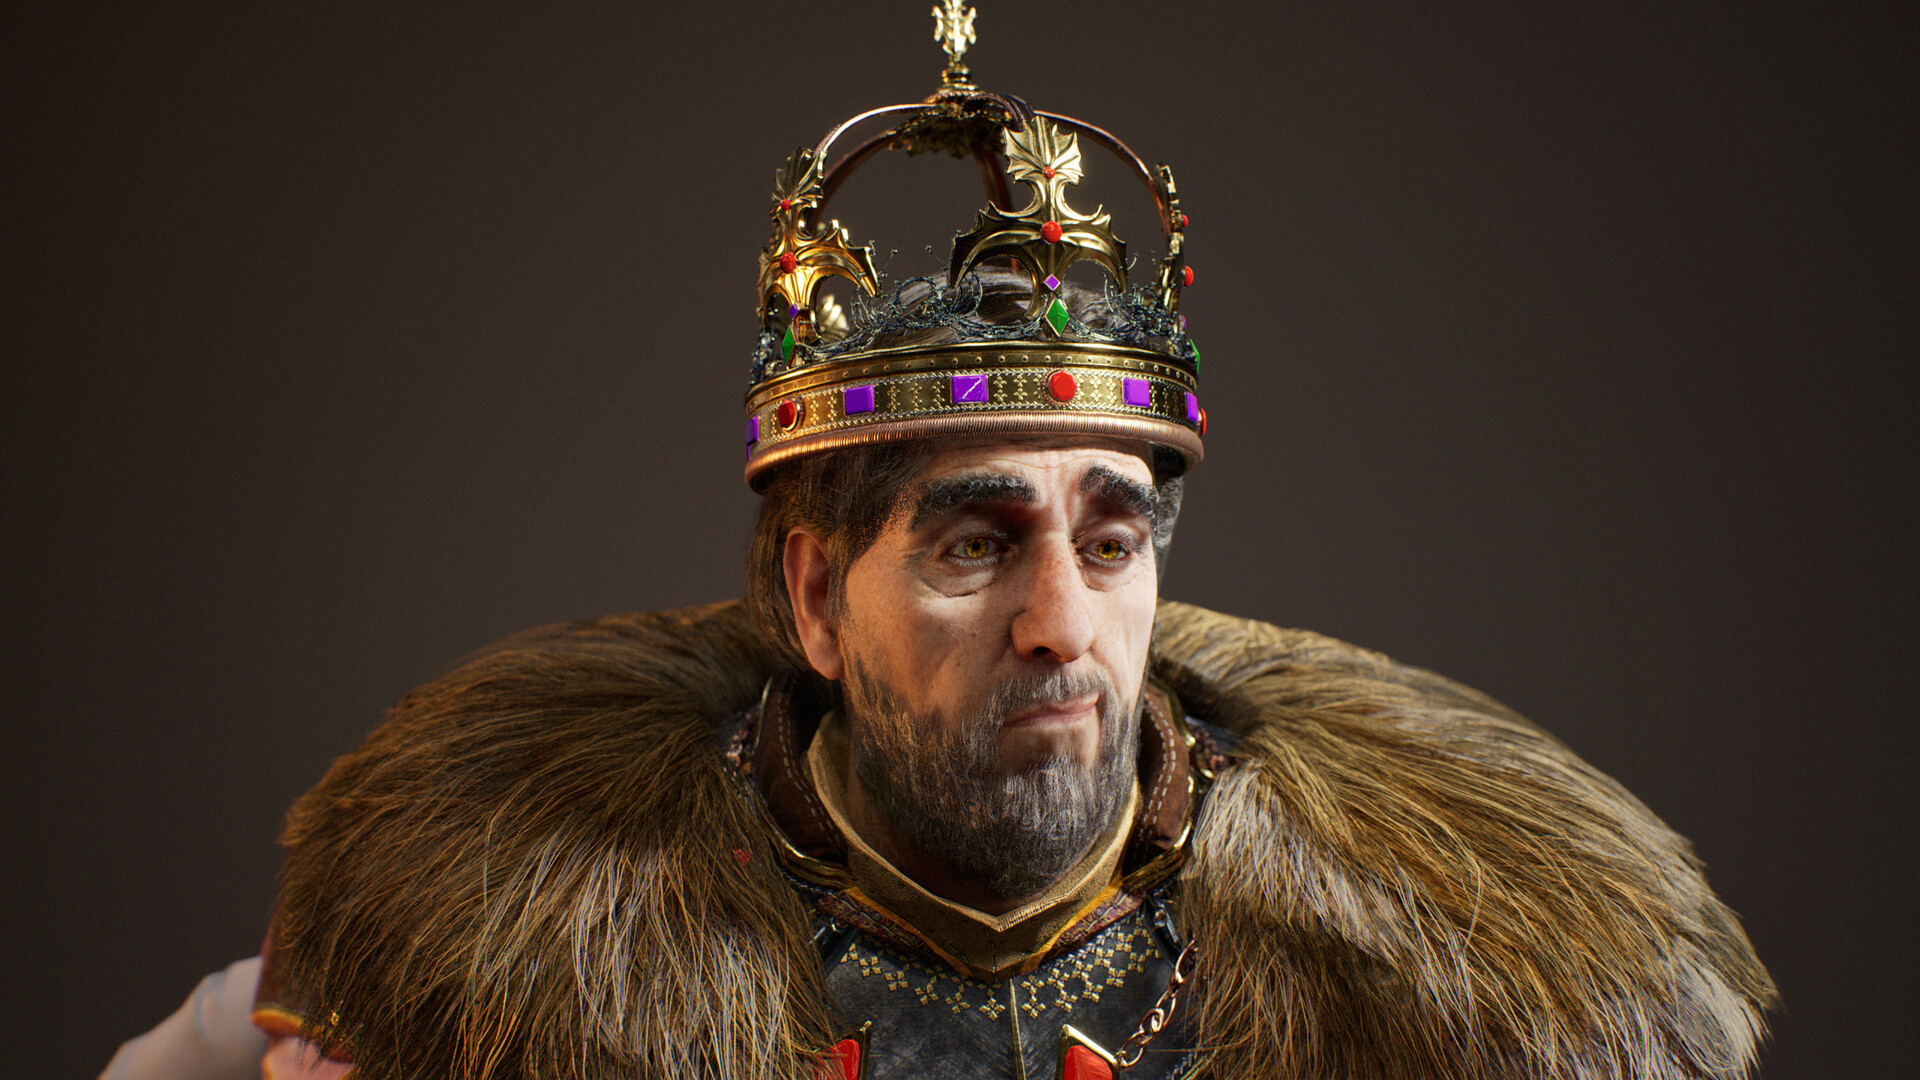 ArtStation - The Royal Court - King Æthelred the Great